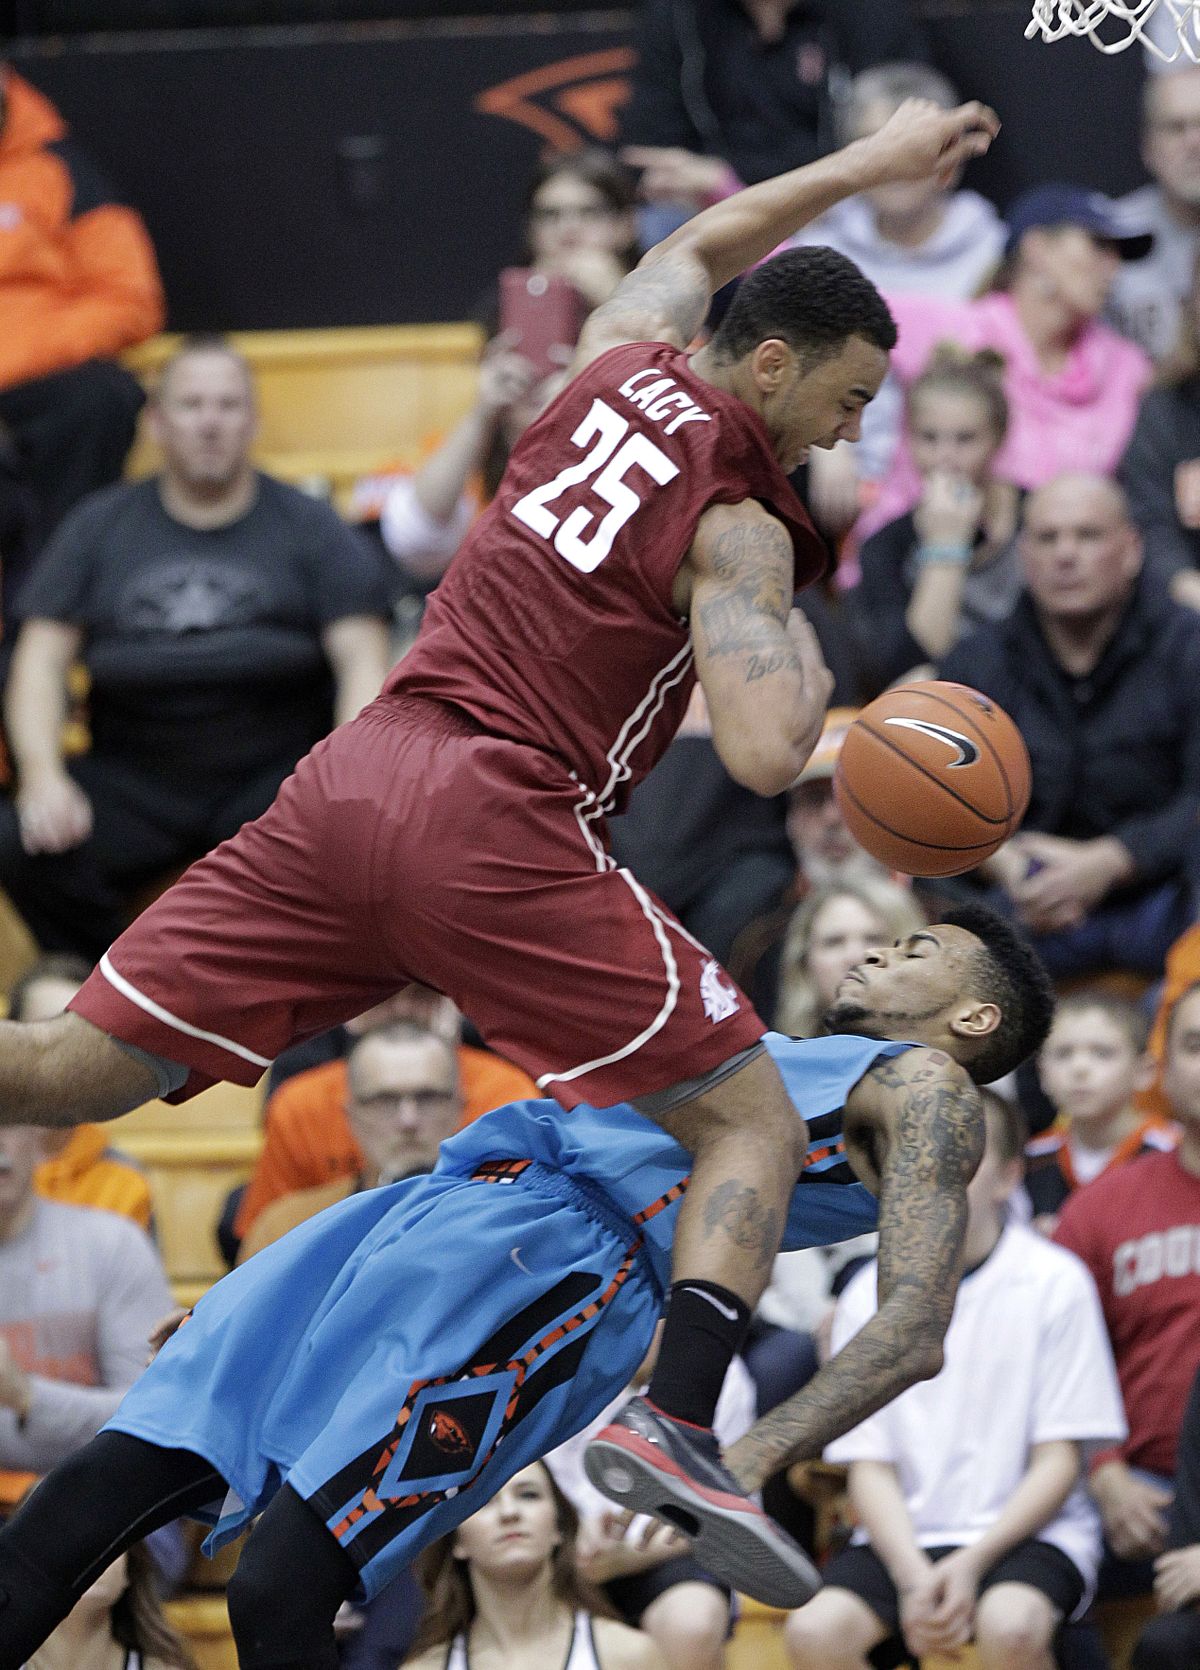 Cougars guard DaVonte Lacy collides with Oregon State forward Eric Moreland on his way to the basket. (Associated Press)